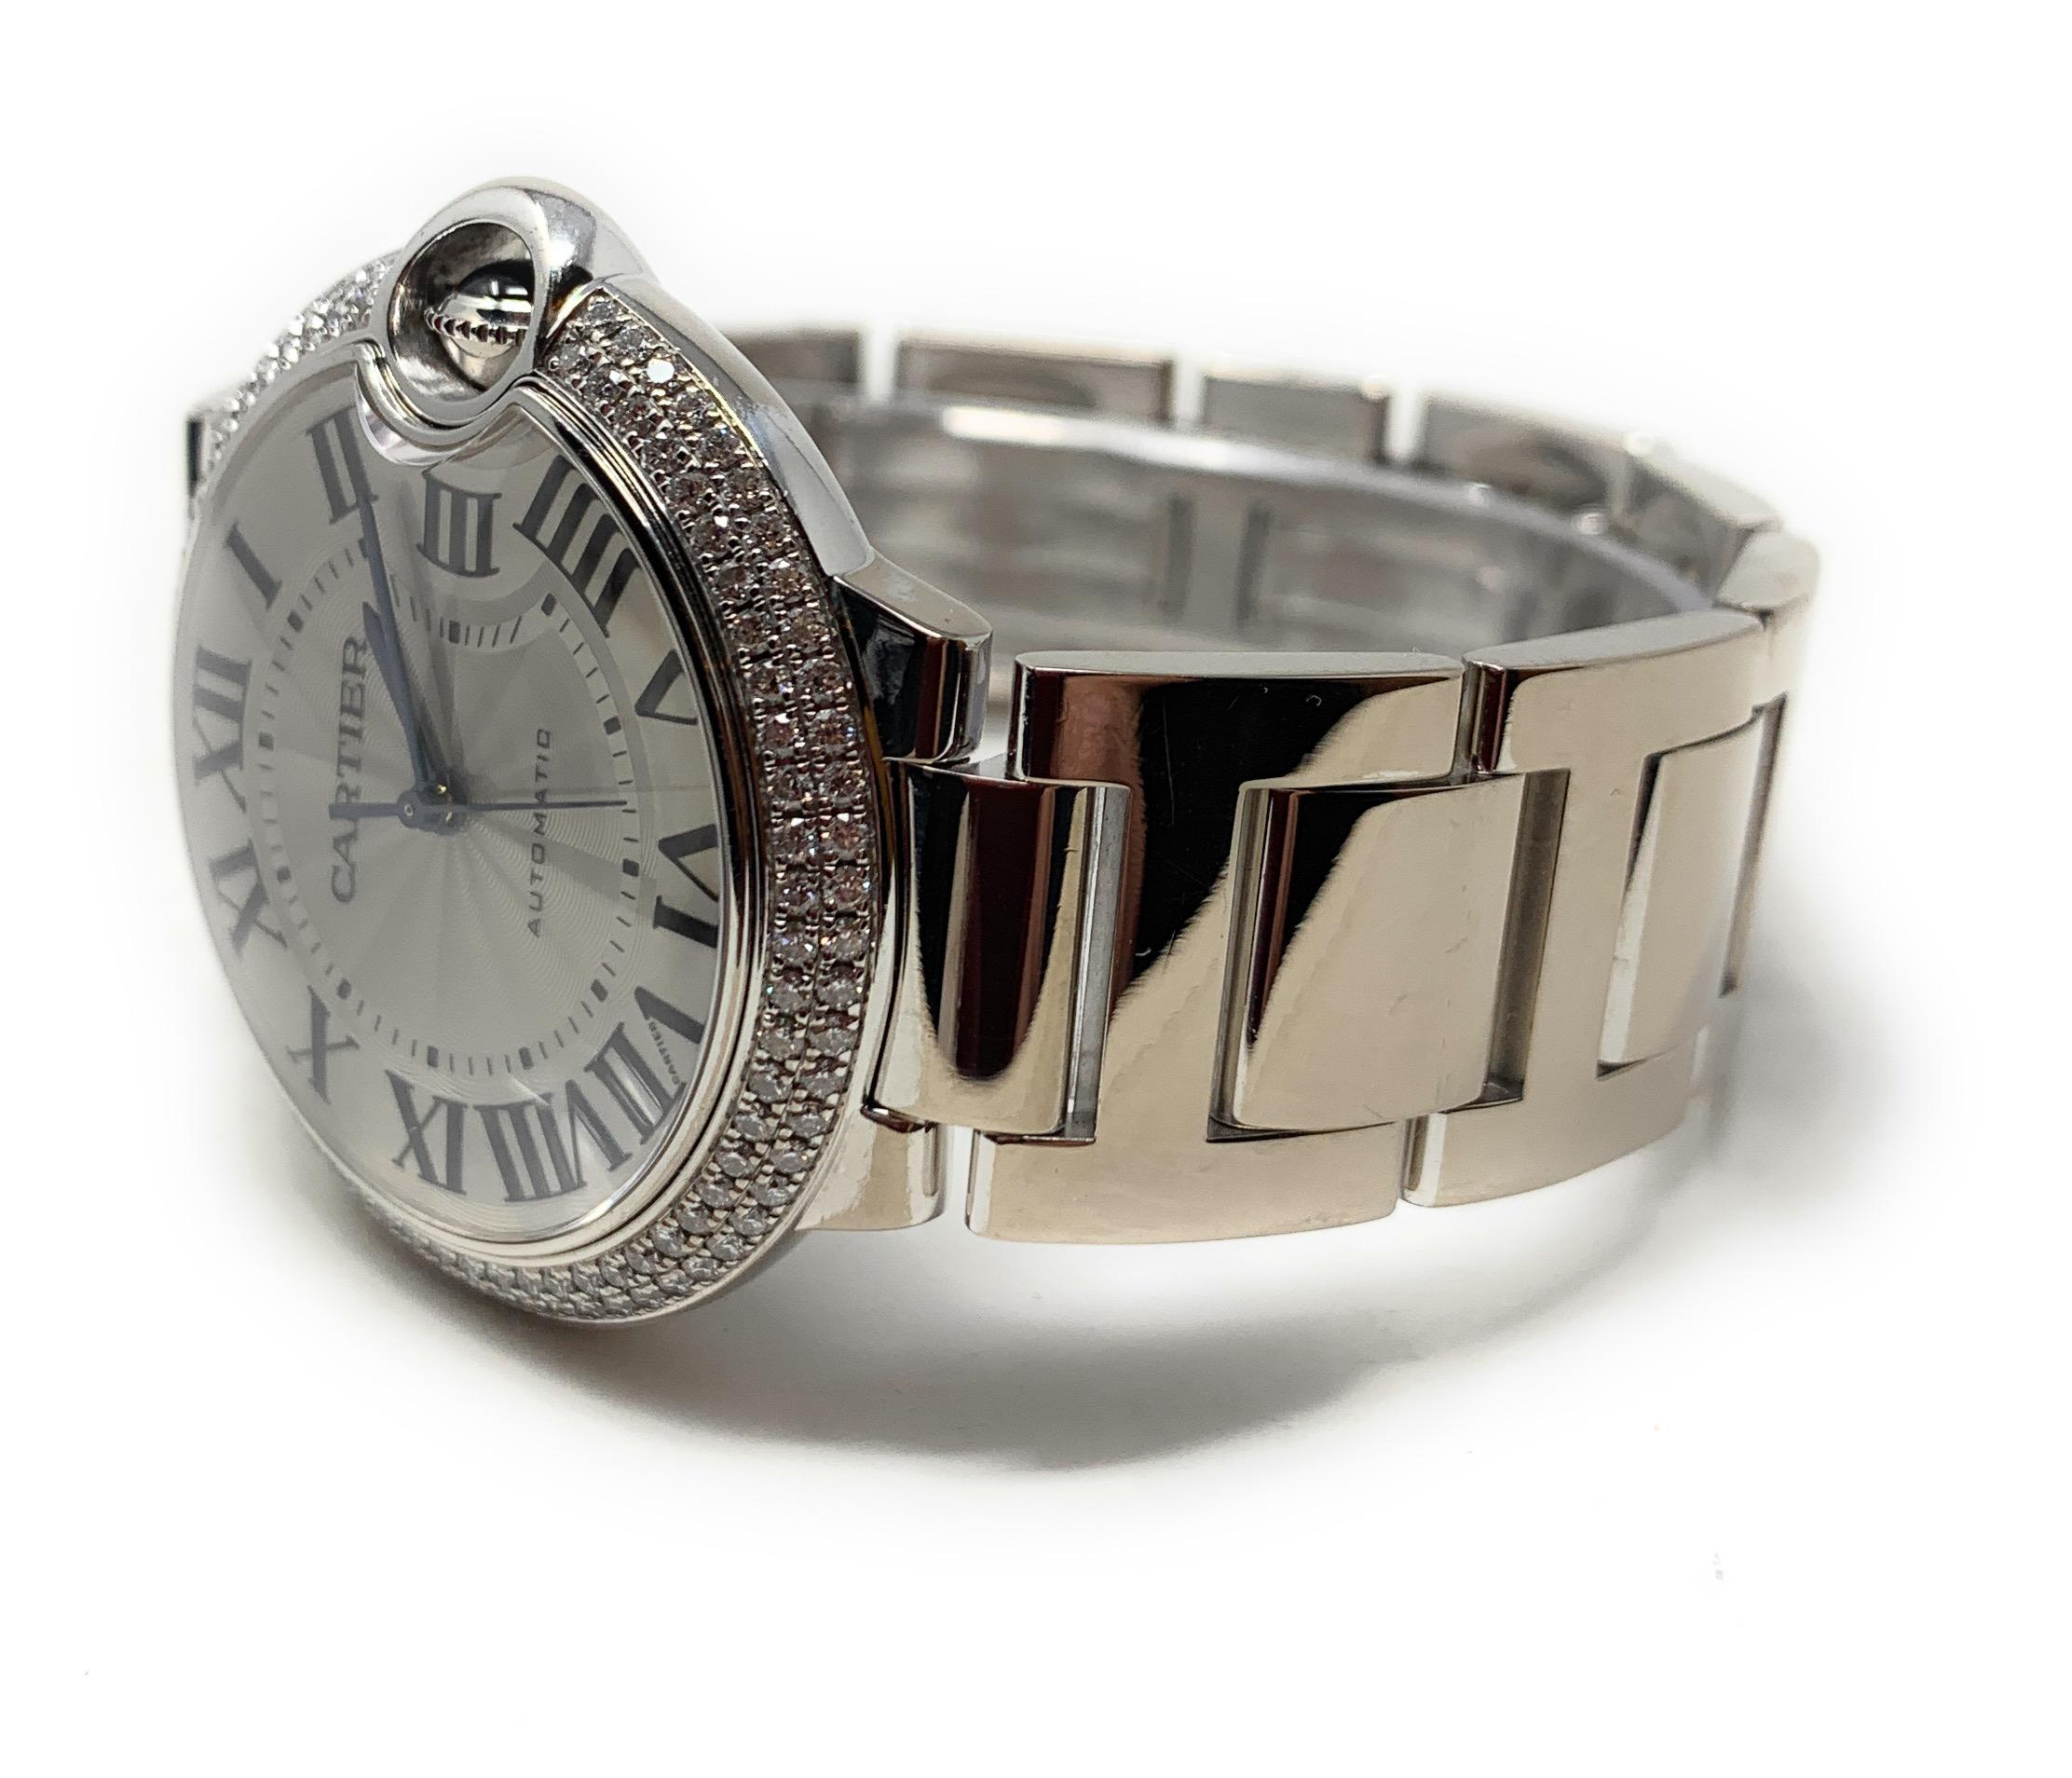 The Ballon Bleu watch collection created by Cartier adds a dash of elegance to men’s and women’s wrists alike. Roman numerals are guided on their path by a sophisticated sapphire cabochon winding mechanism protected by an arc of high quality